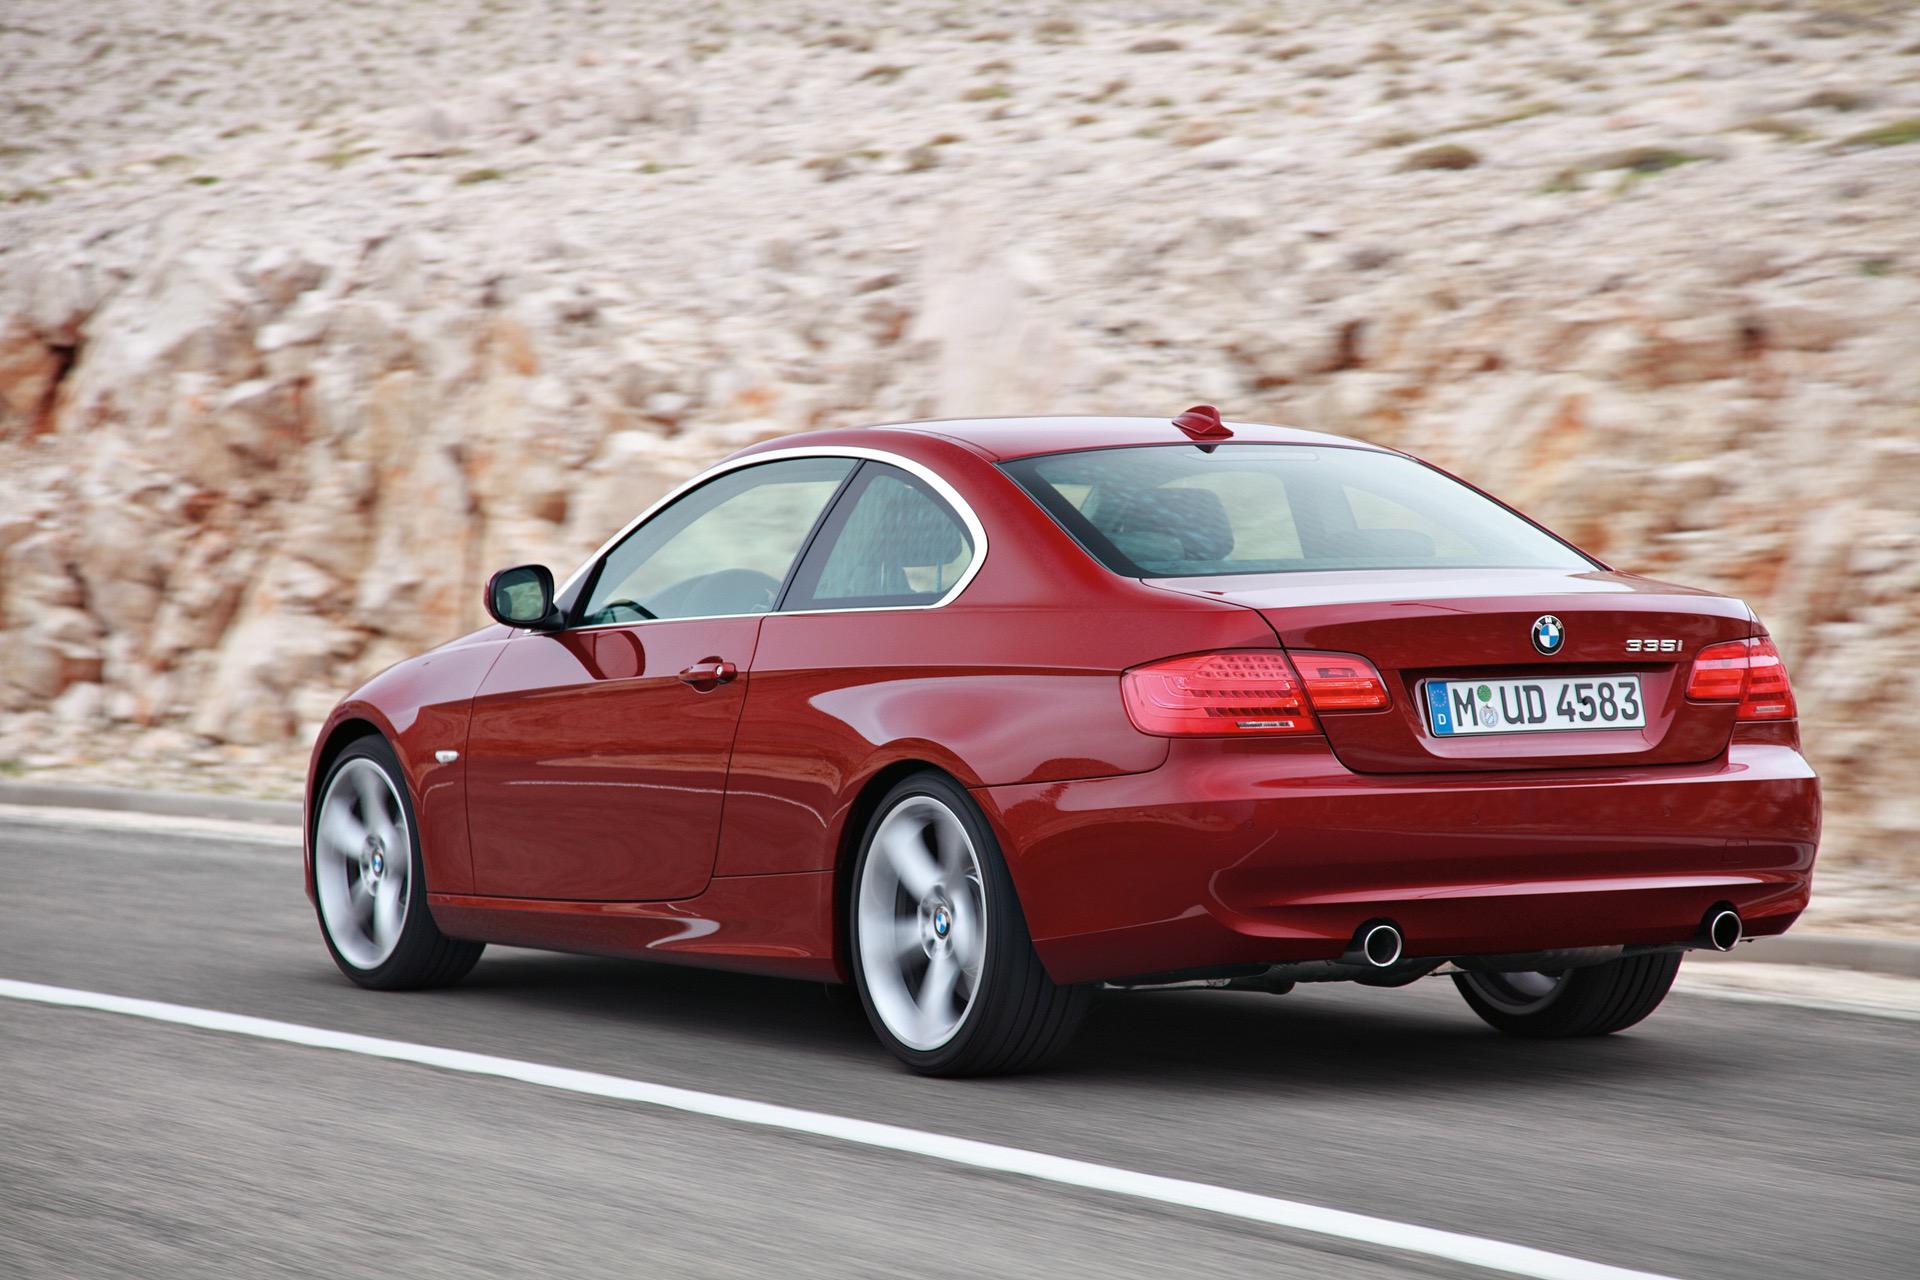 BMW E92 3 Series Buying Guide - Which Model Should Buy?